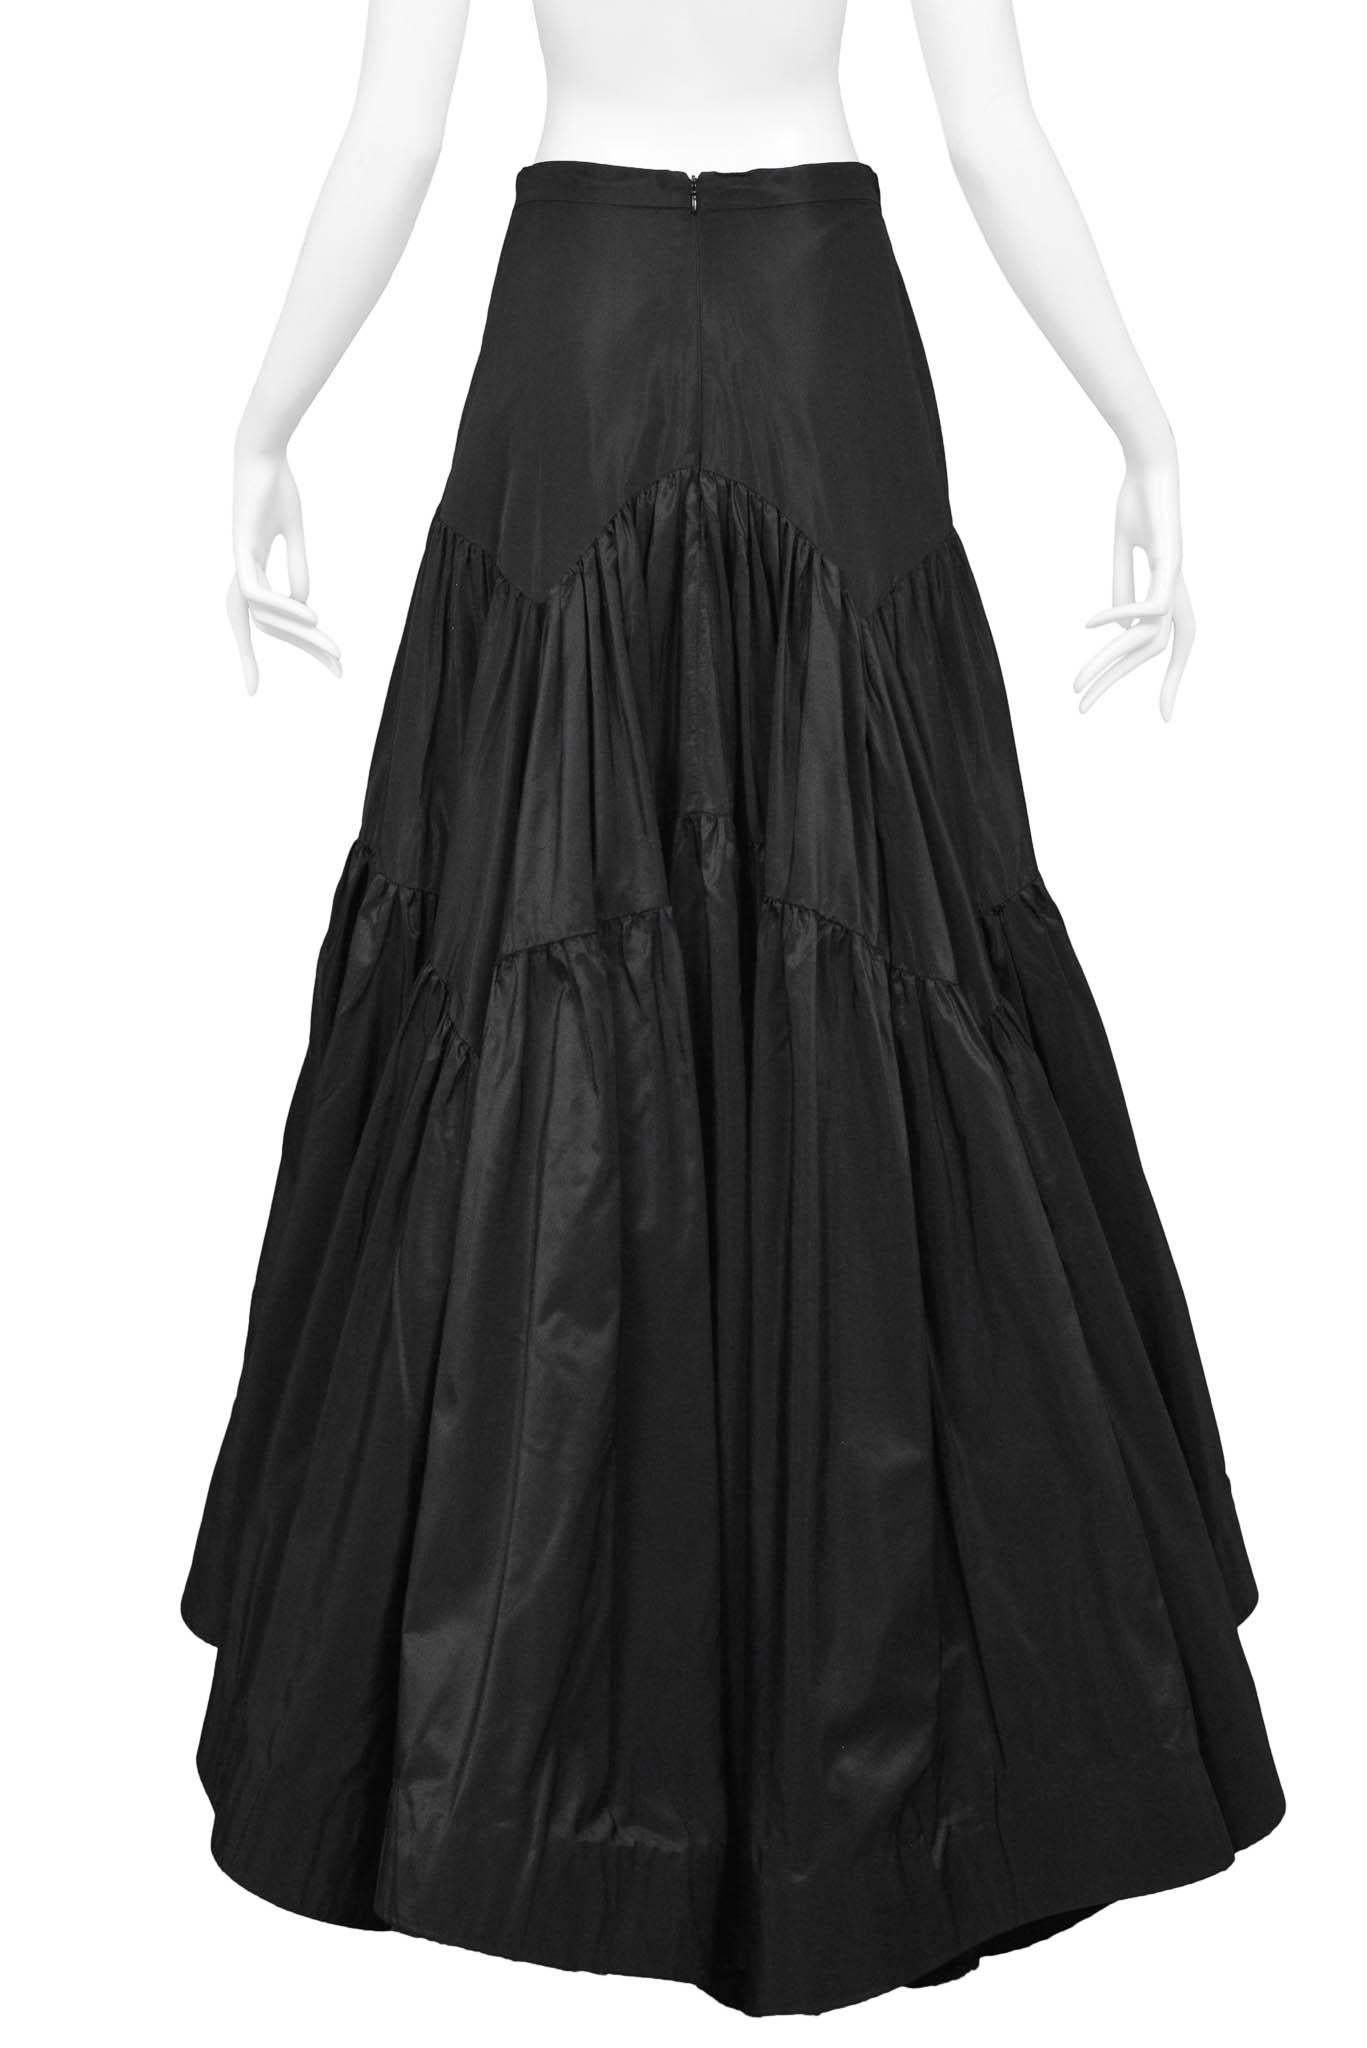 Katy Rodriguez Black Ball Gown Skirt For Sale 3